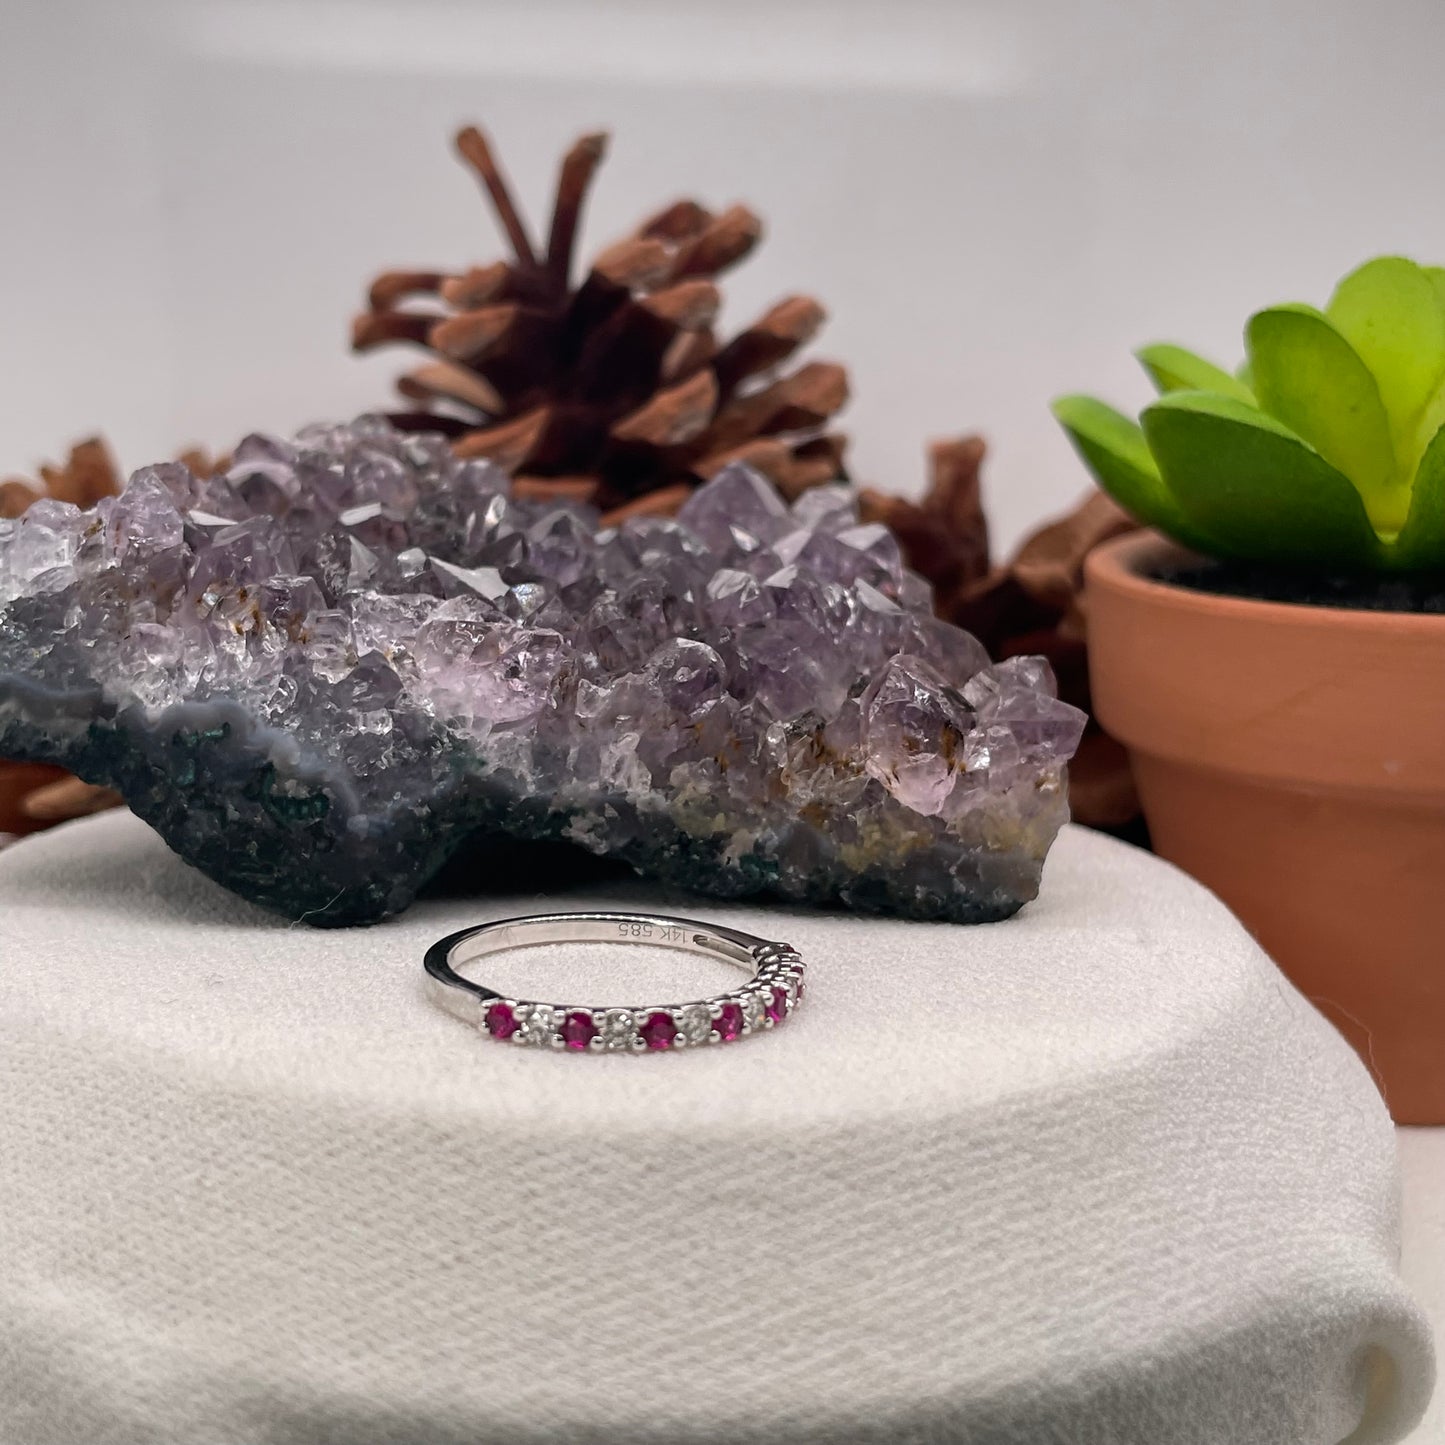 14K White Gold Ruby Ring with Diamond